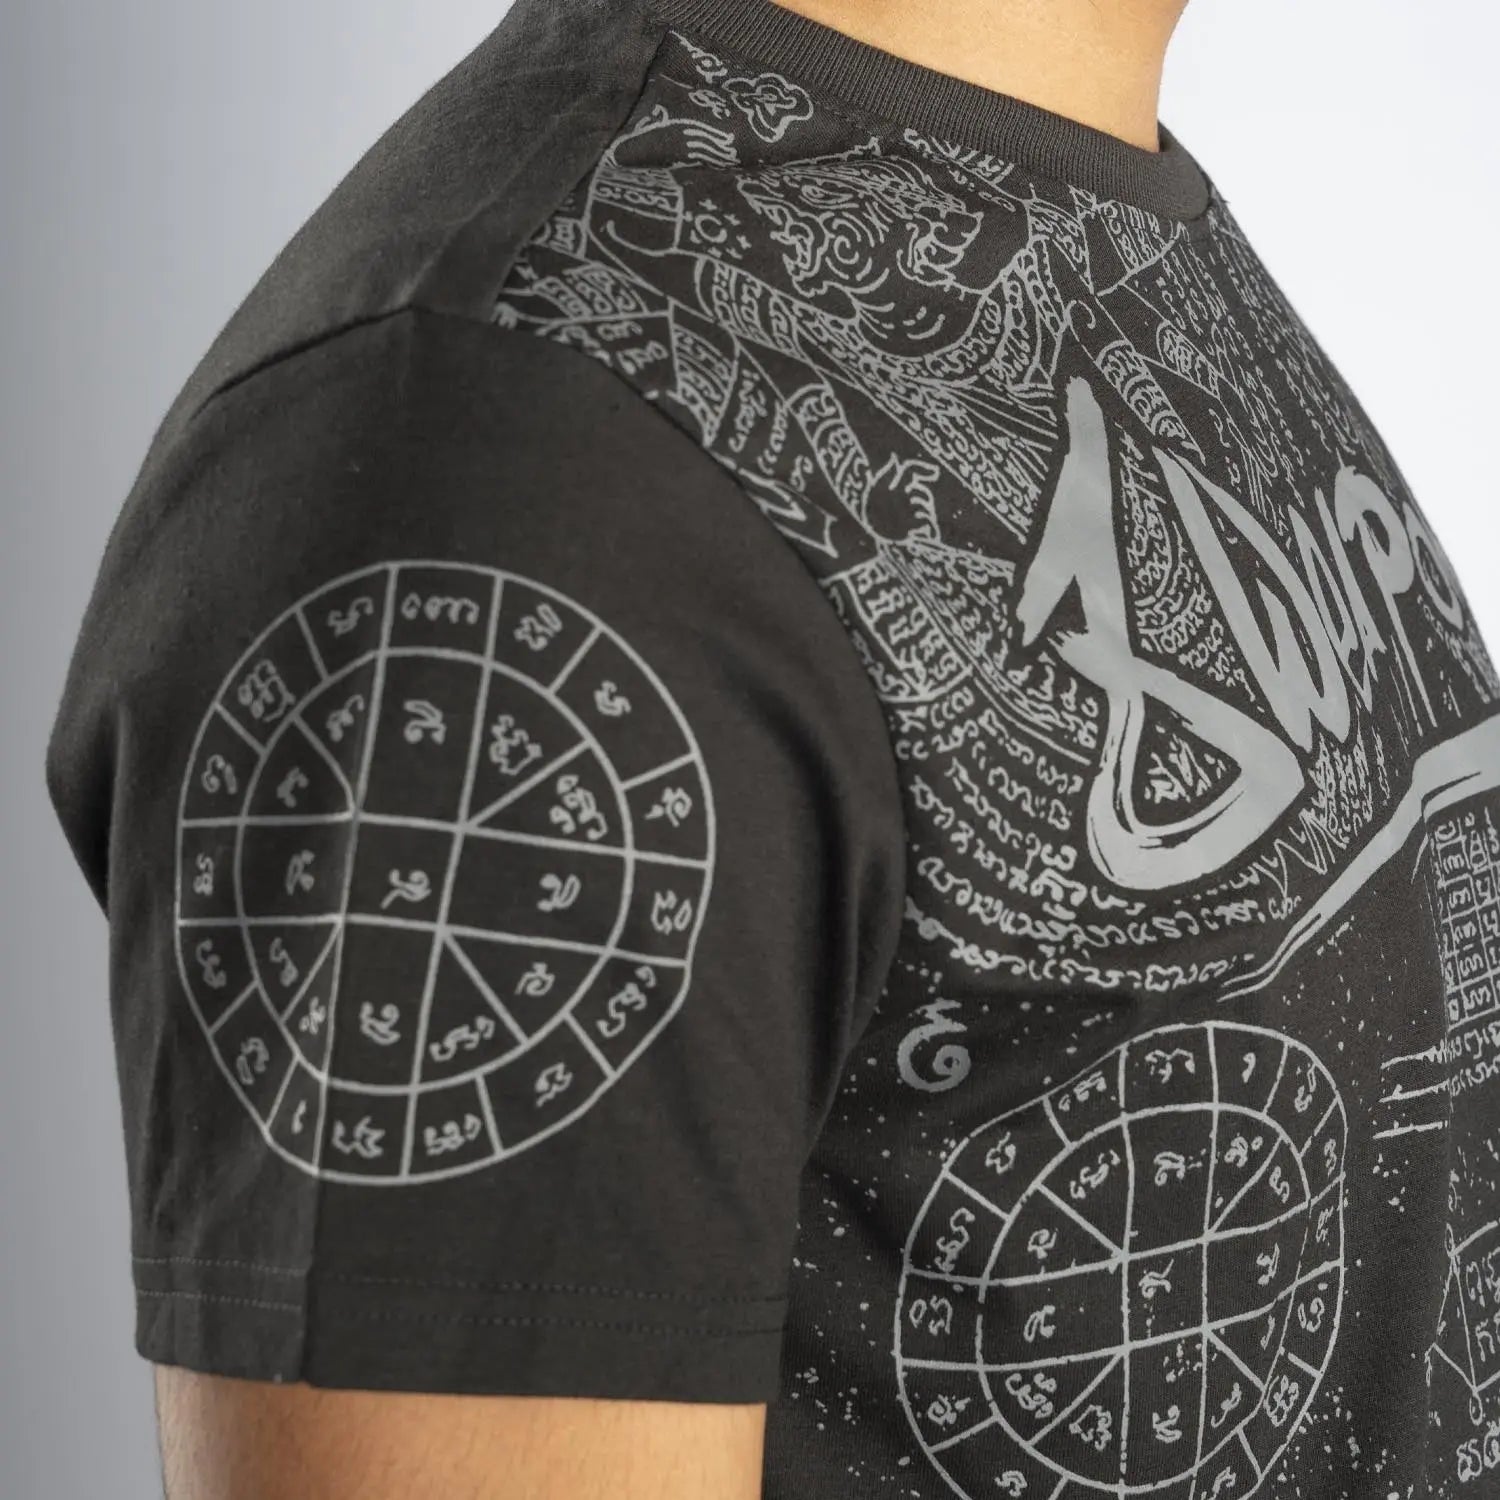 8 WEAPONS T-Shirt - Yantra - Fight Co